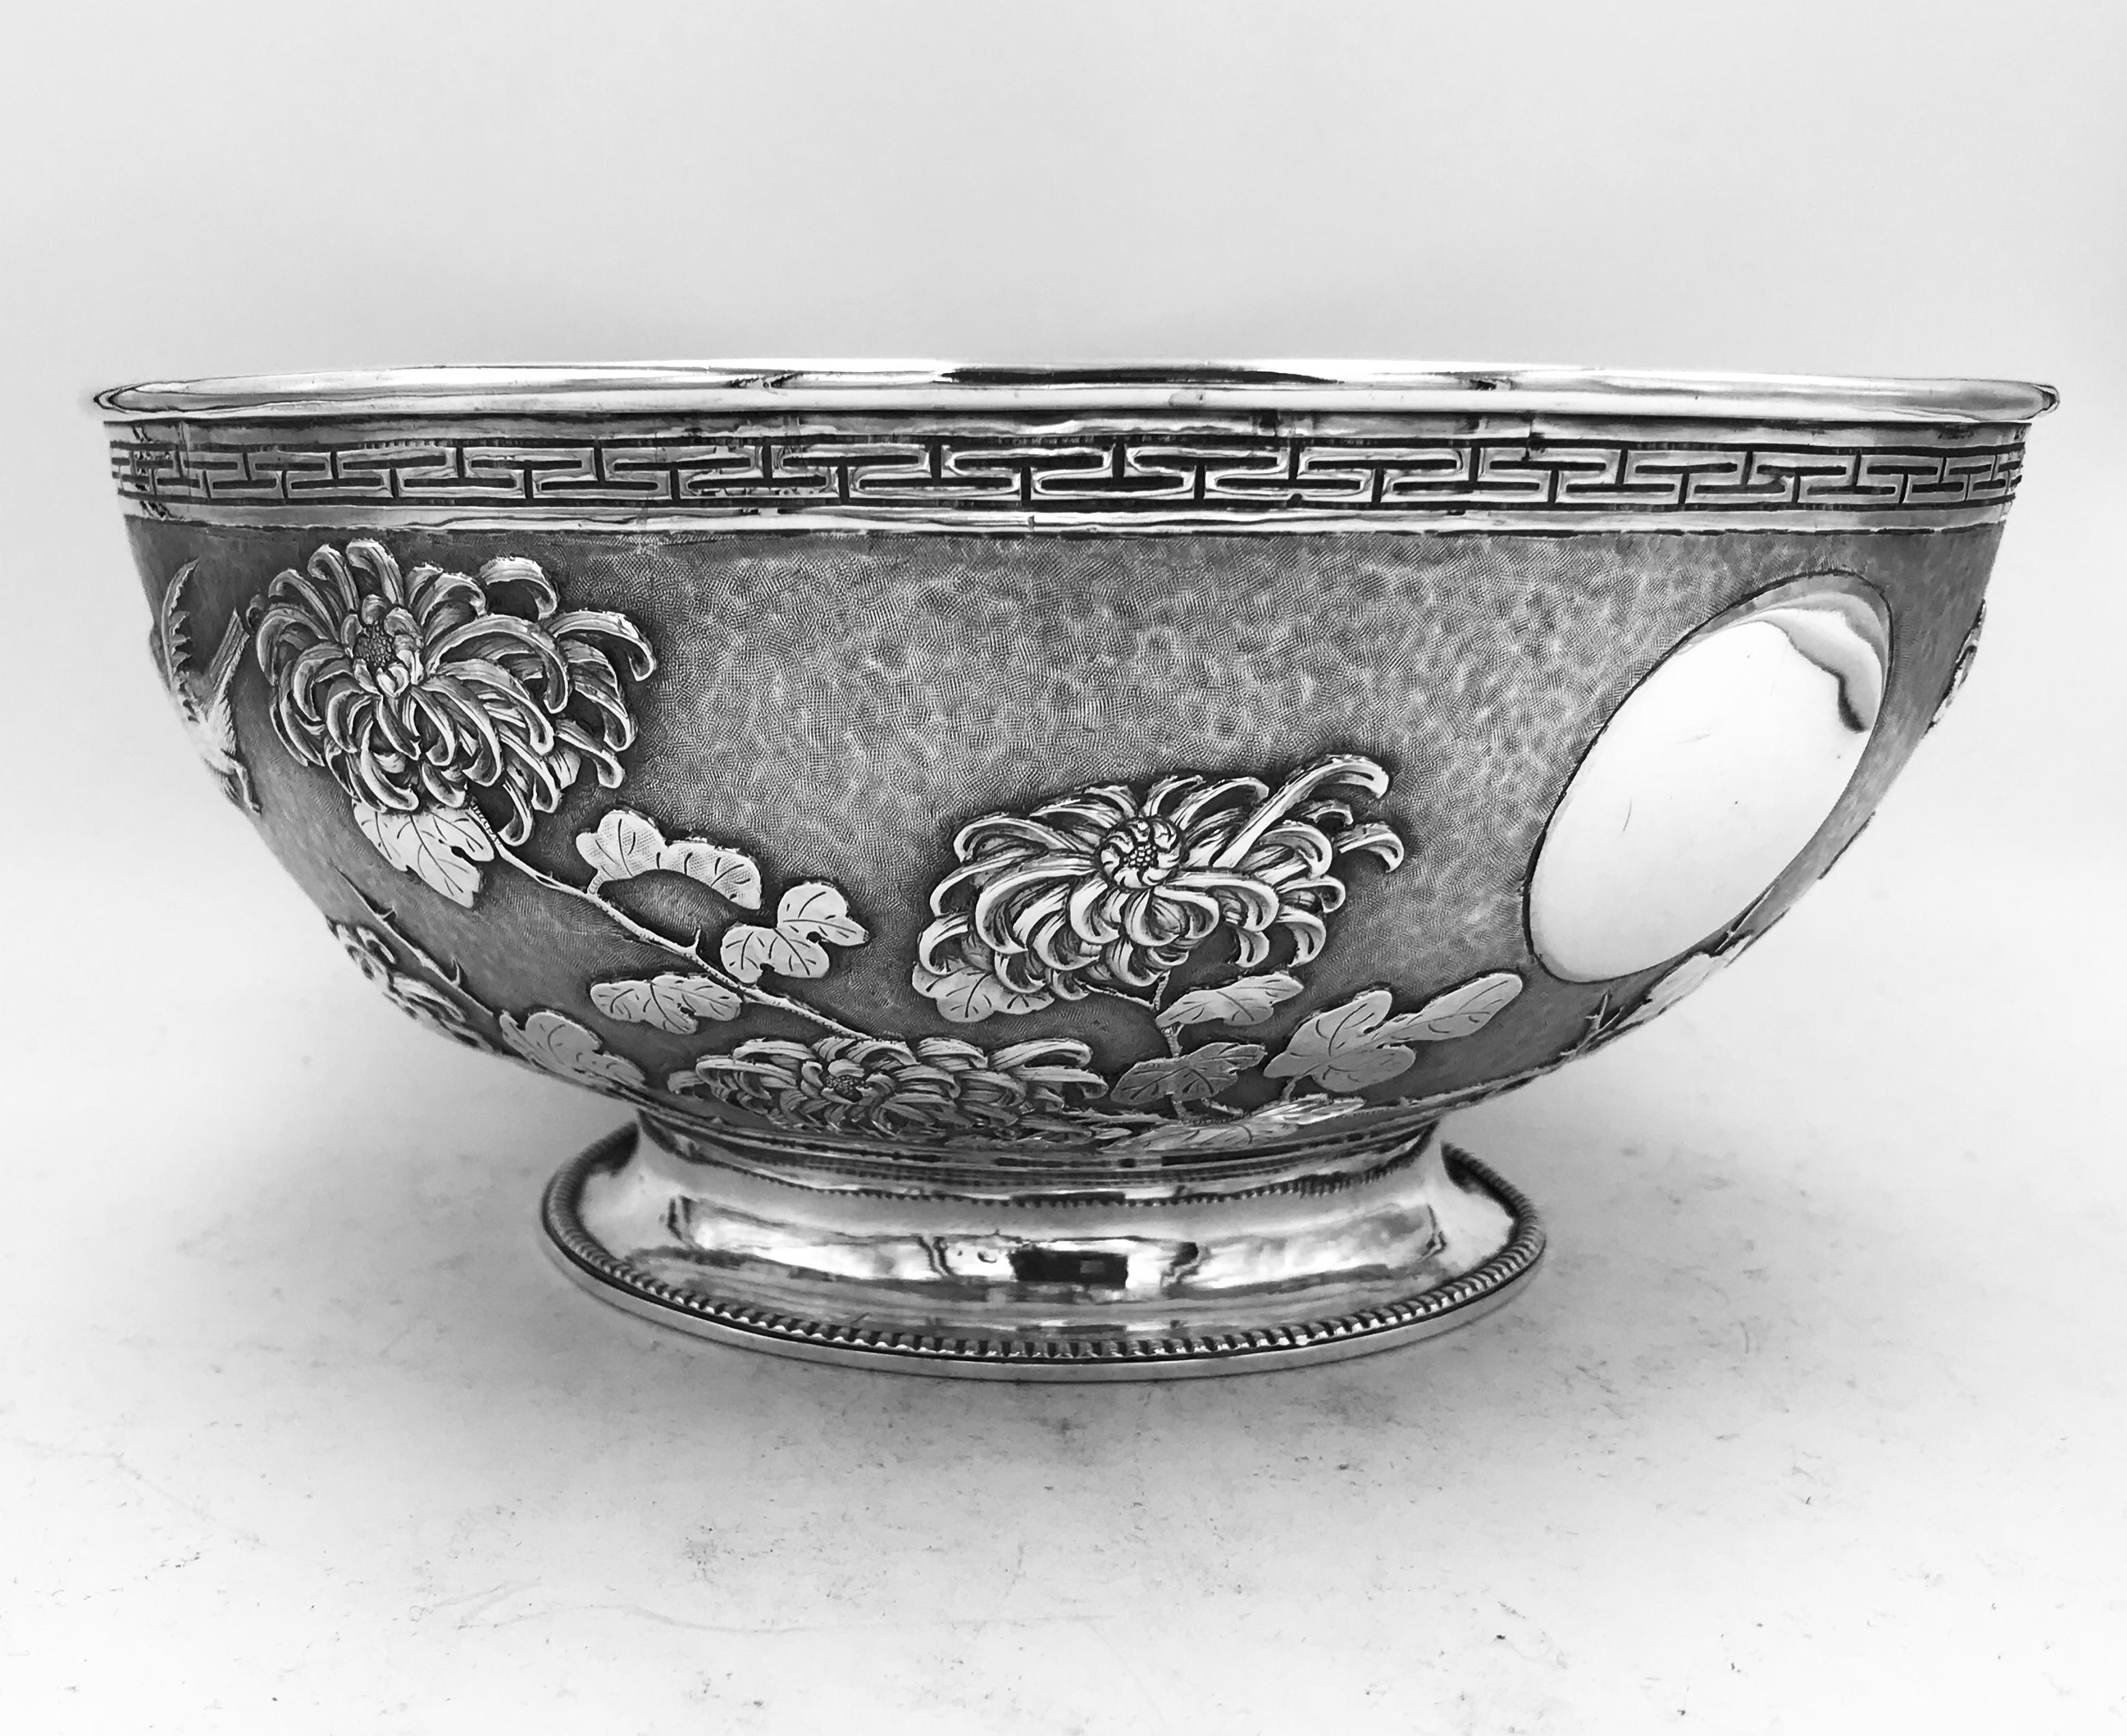 A lovely Chinese silver bowl, embossed and chased with three birds and chrysanthemum against a textured matte background. Made by the firm of Shao Ji'绍记’, and retailed by Luen Hing '联兴‘ of Shanghai, circa 1890.